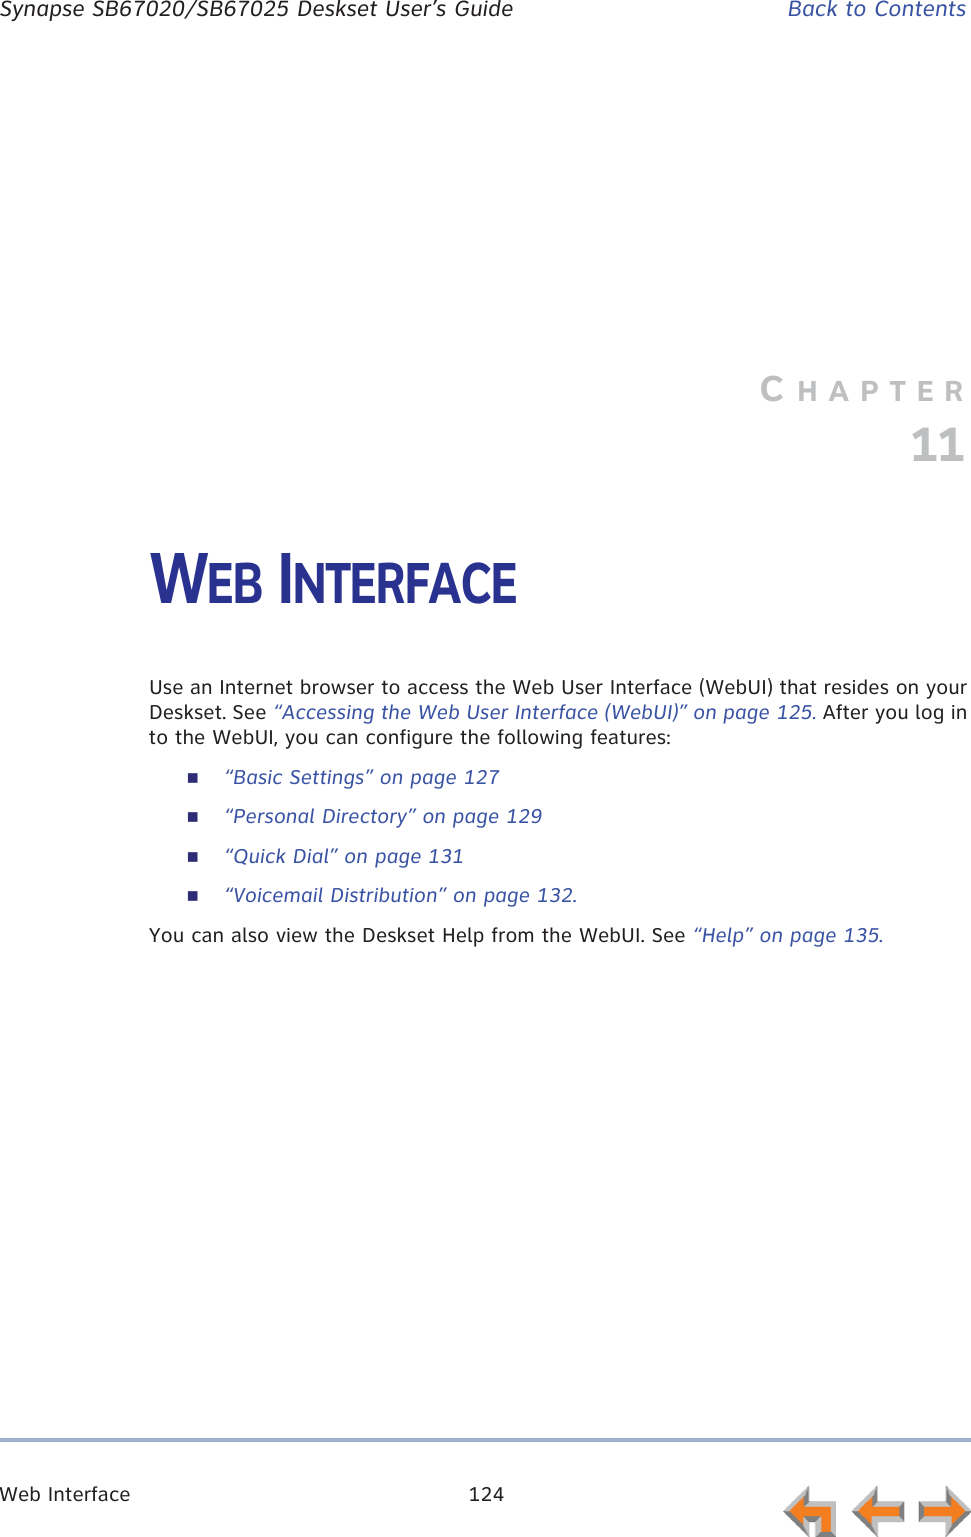 Web Interface 124      Synapse SB67020/SB67025 Deskset User’s Guide Back to ContentsCHAPTER11WEB INTERFACEUse an Internet browser to access the Web User Interface (WebUI) that resides on your Deskset. See “Accessing the Web User Interface (WebUI)” on page 125. After you log in to the WebUI, you can configure the following features:“Basic Settings” on page 127“Personal Directory” on page 129“Quick Dial” on page 131“Voicemail Distribution” on page 132.You can also view the Deskset Help from the WebUI. See “Help” on page 135.